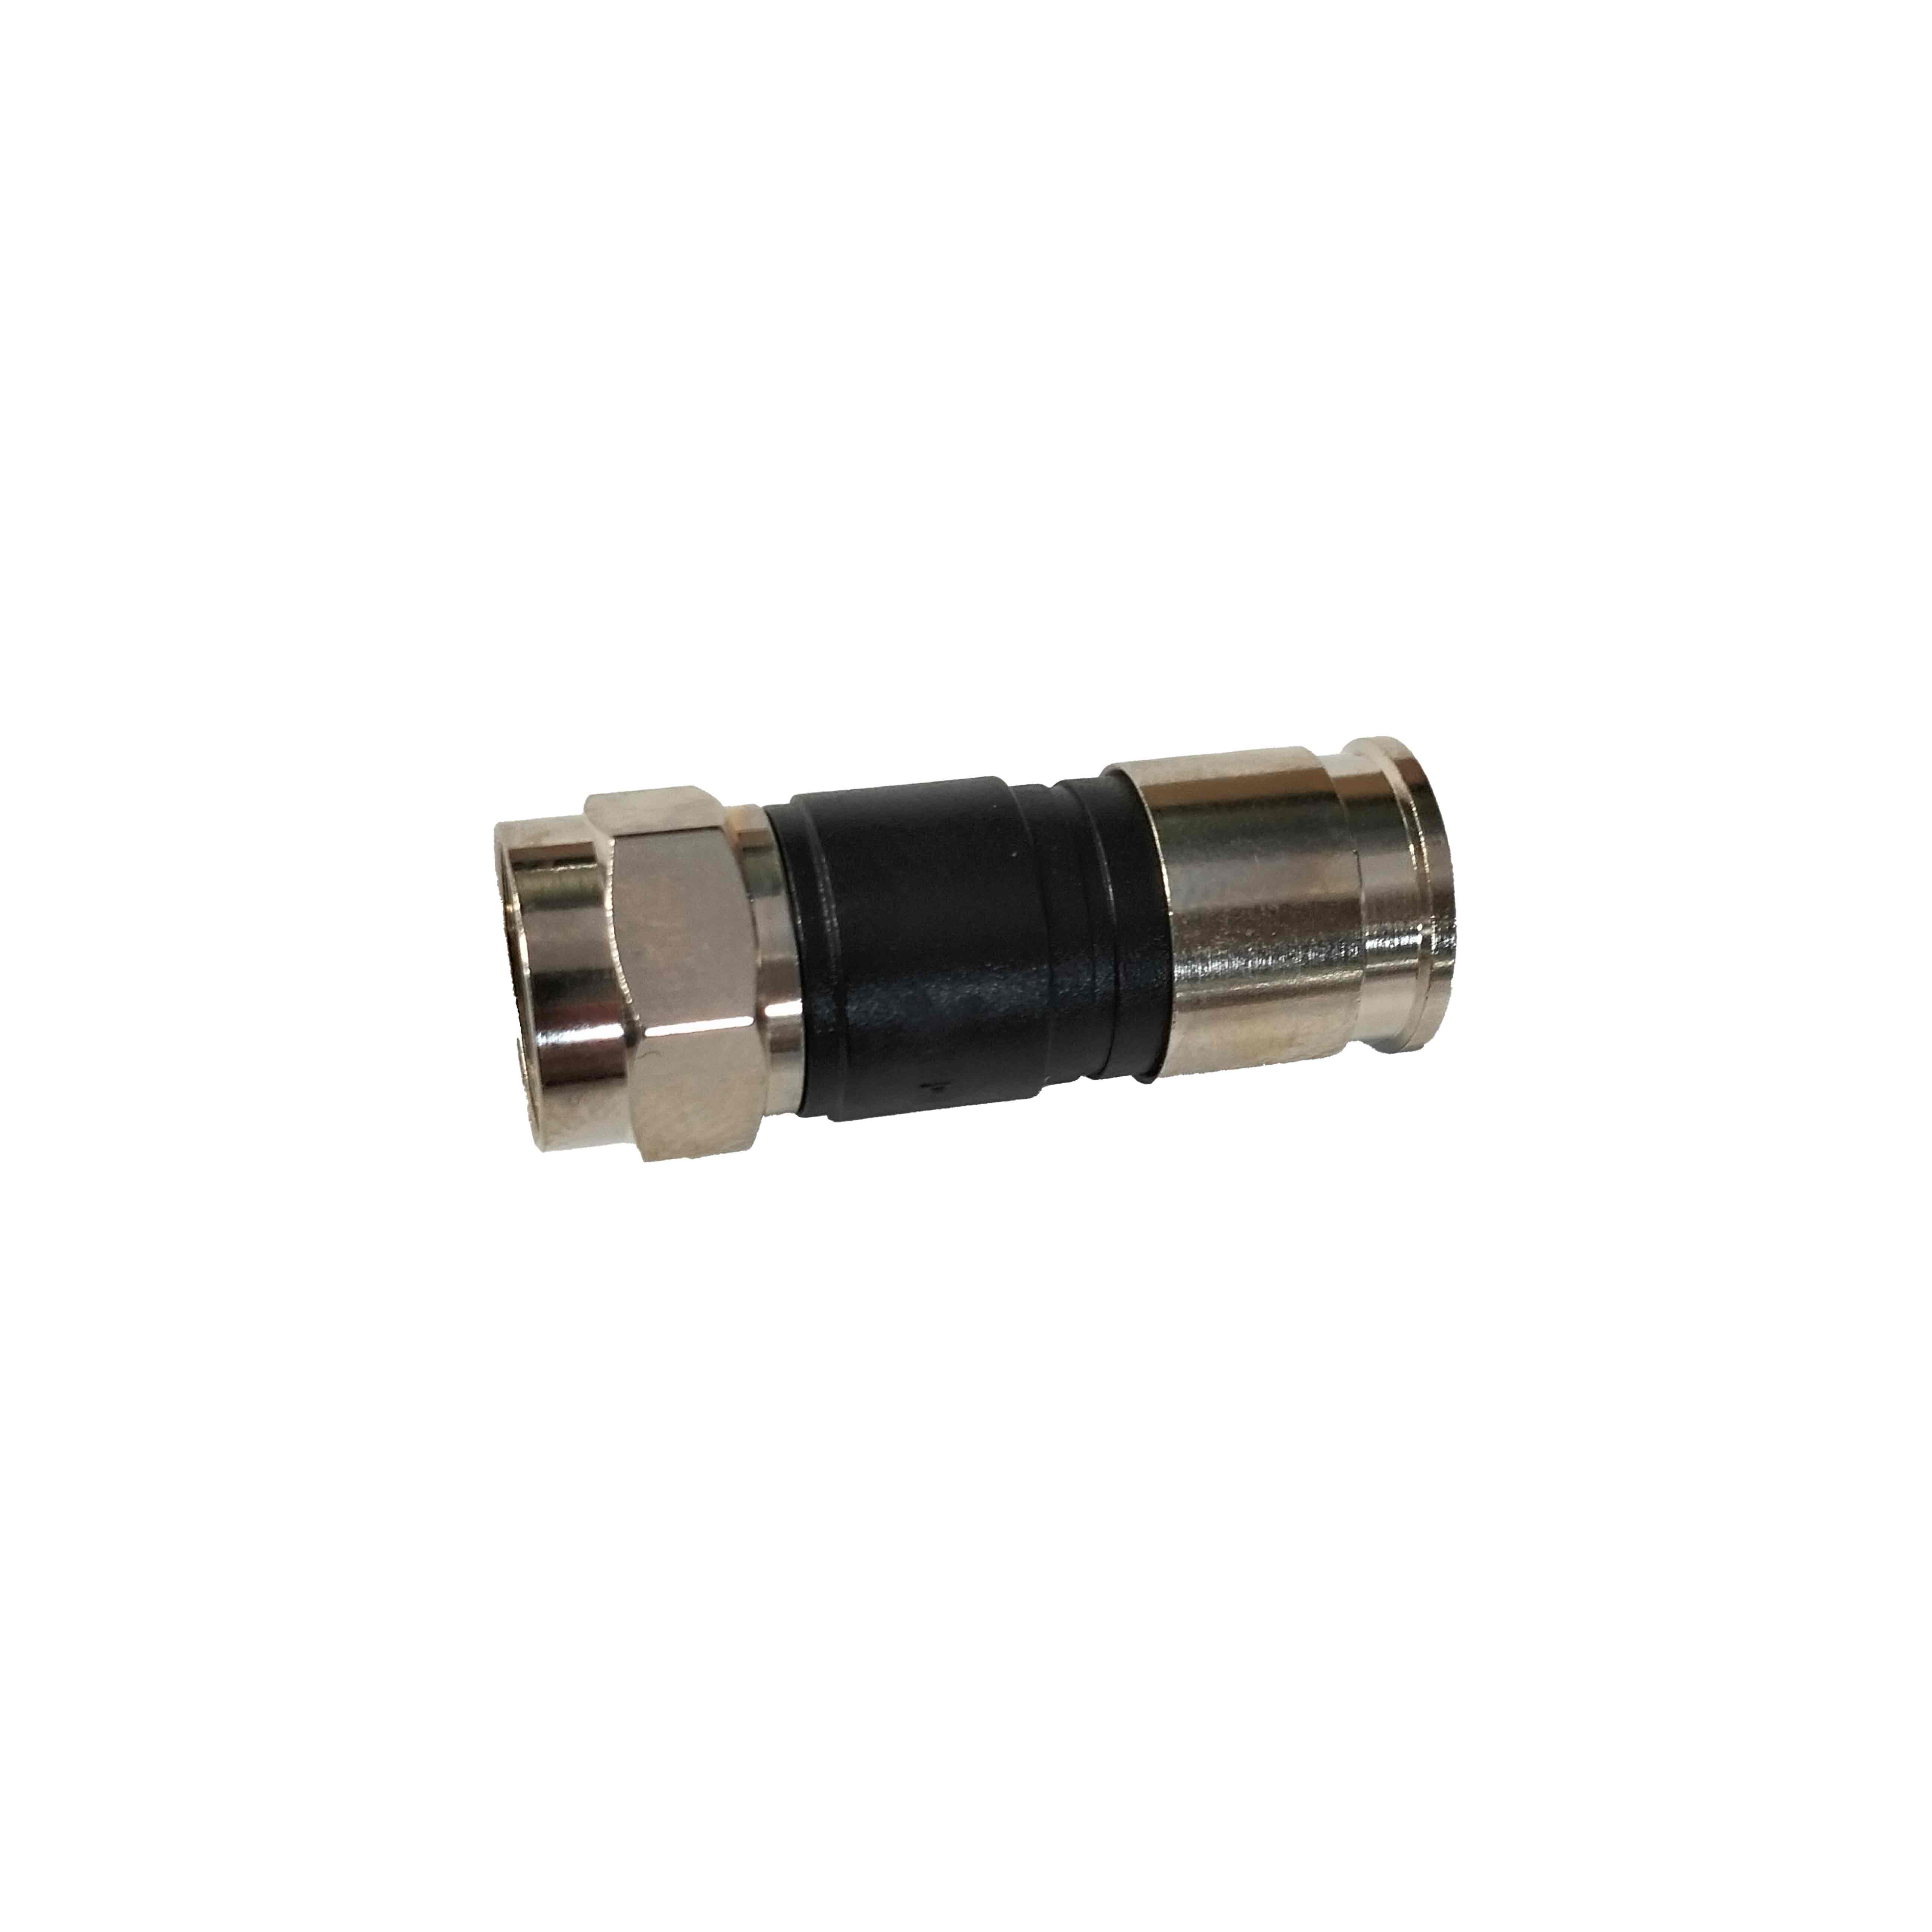 RG6 Universal Compression F Connector - Click for more info